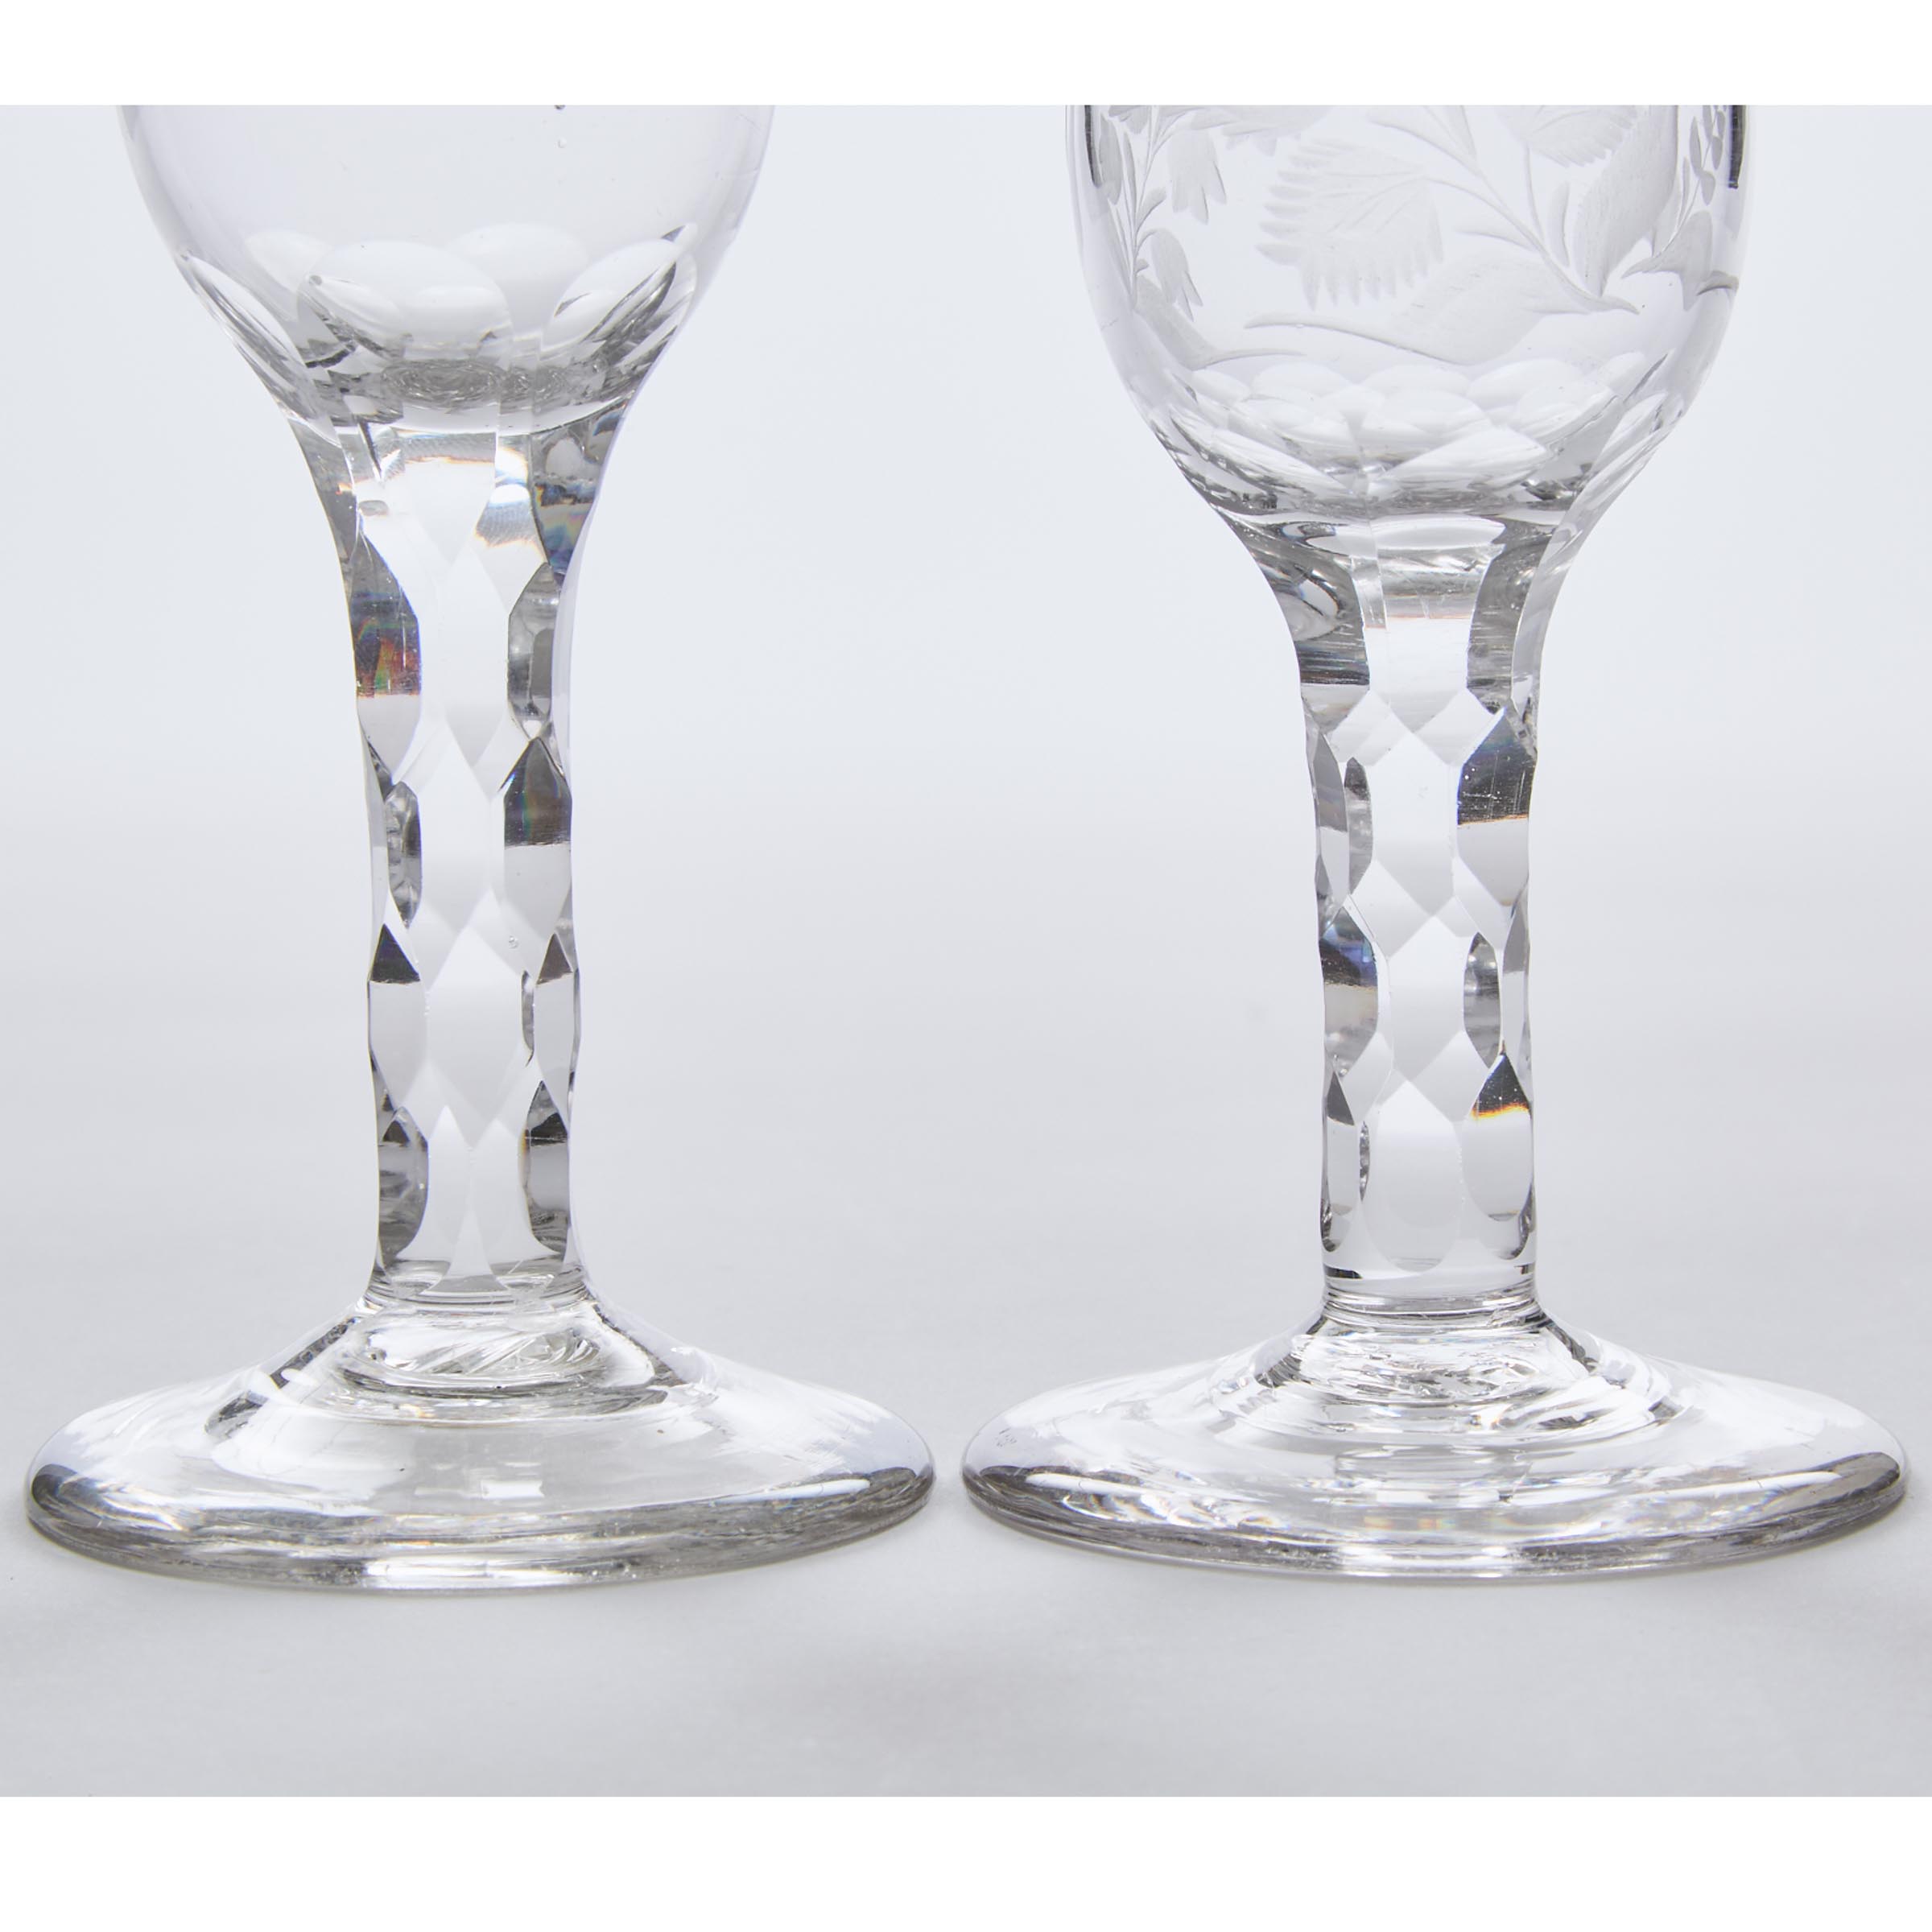 Two English Engraved Faceted Stemmed Wine Glasses, c.1765-80